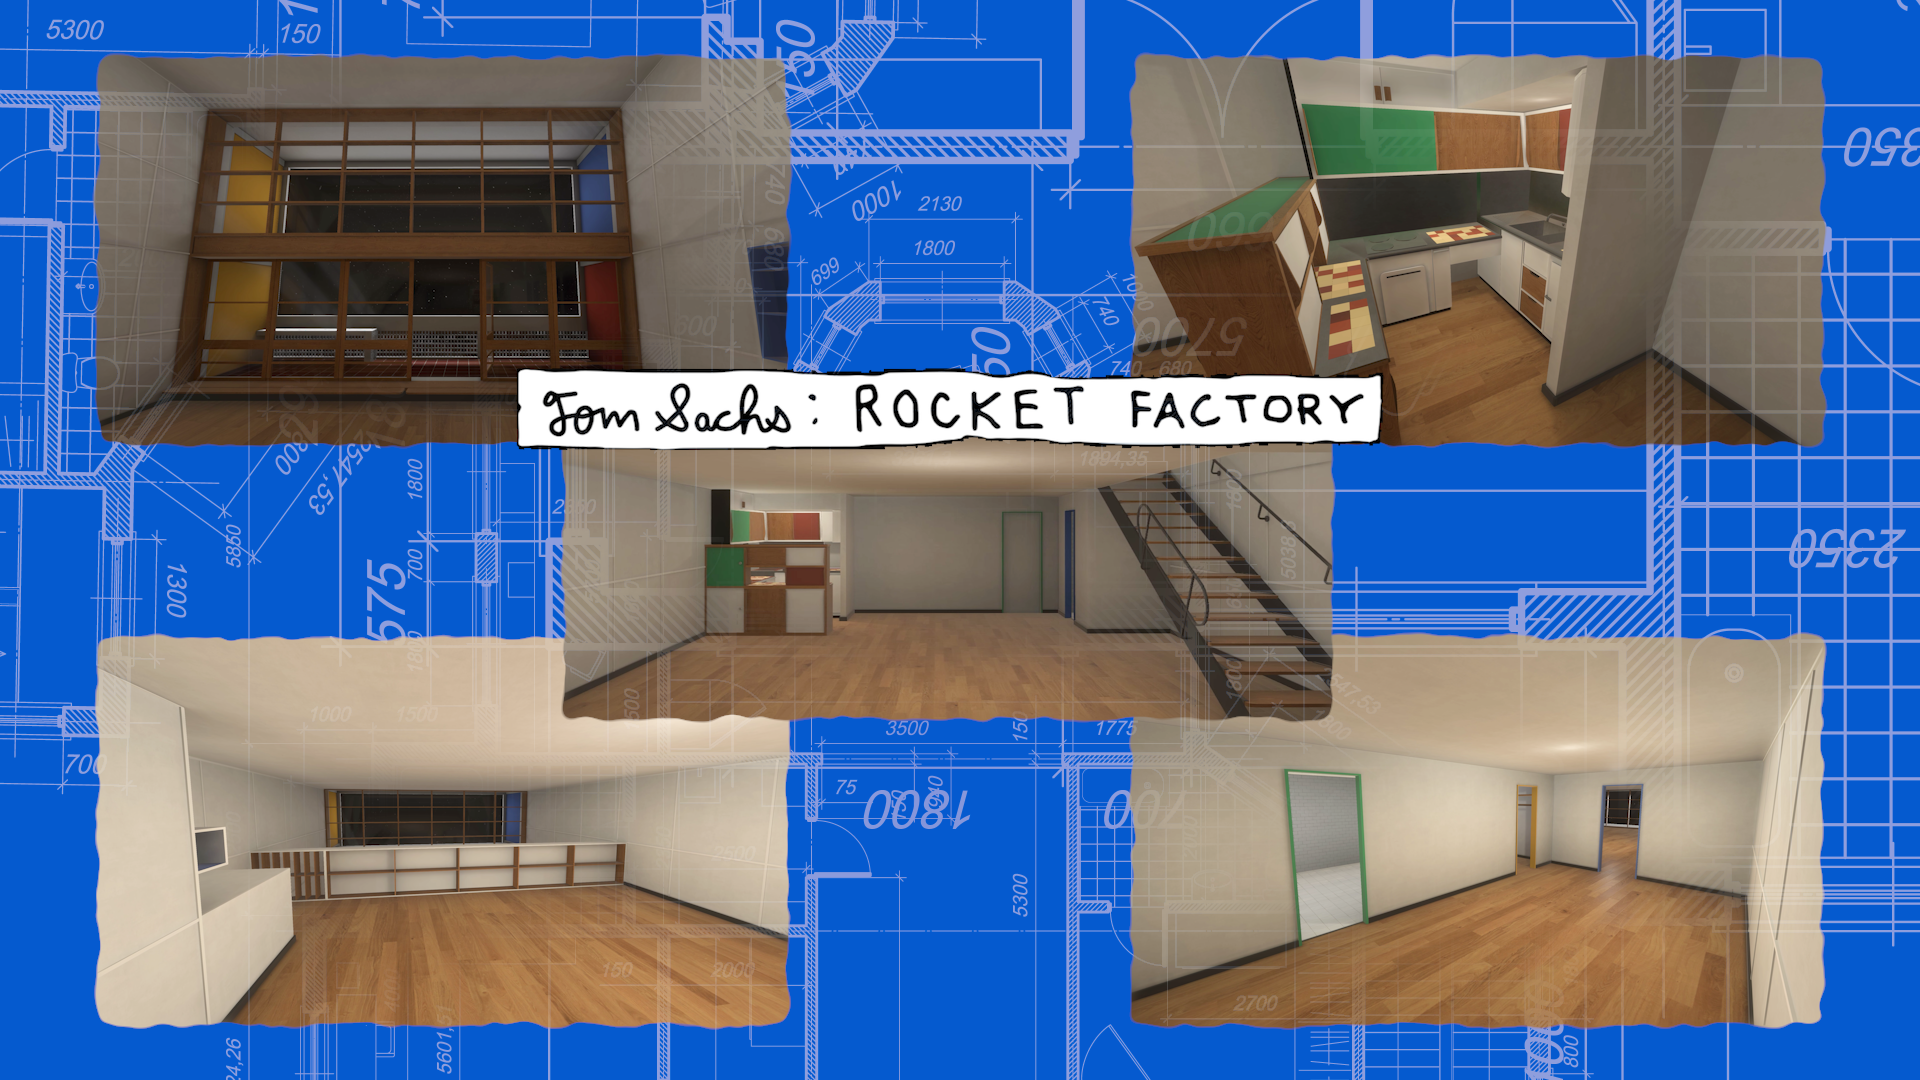 Exploring the Final Frontier: How Tom Sachs and Mona are Shaping Virtual Worlds